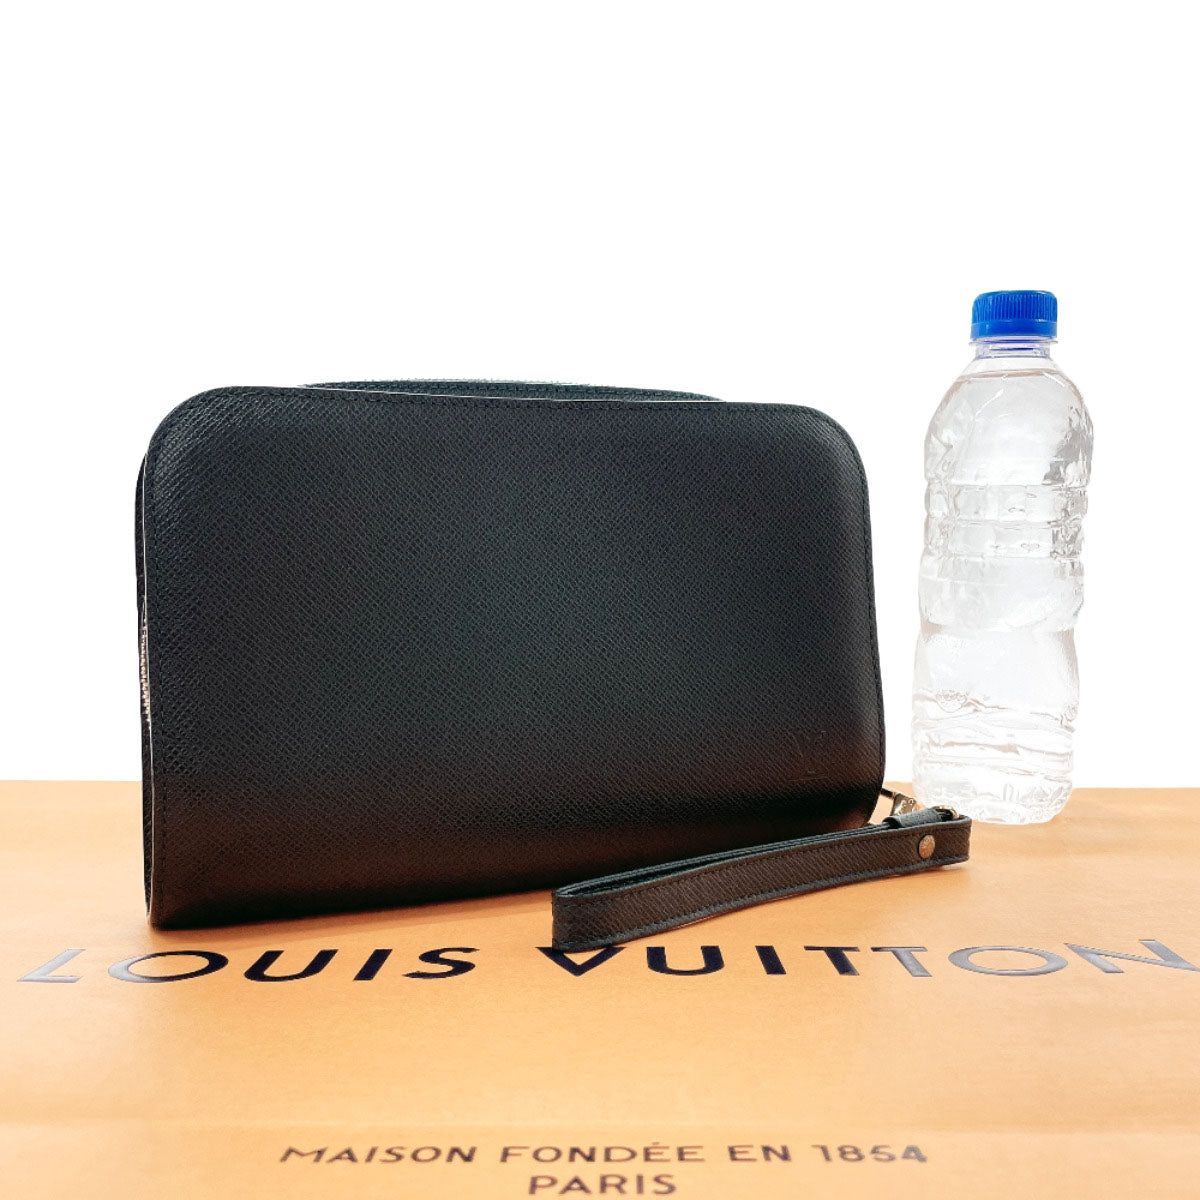 Louis Vuitton Baikal Leather Clutch Bag M30184 in Good condition